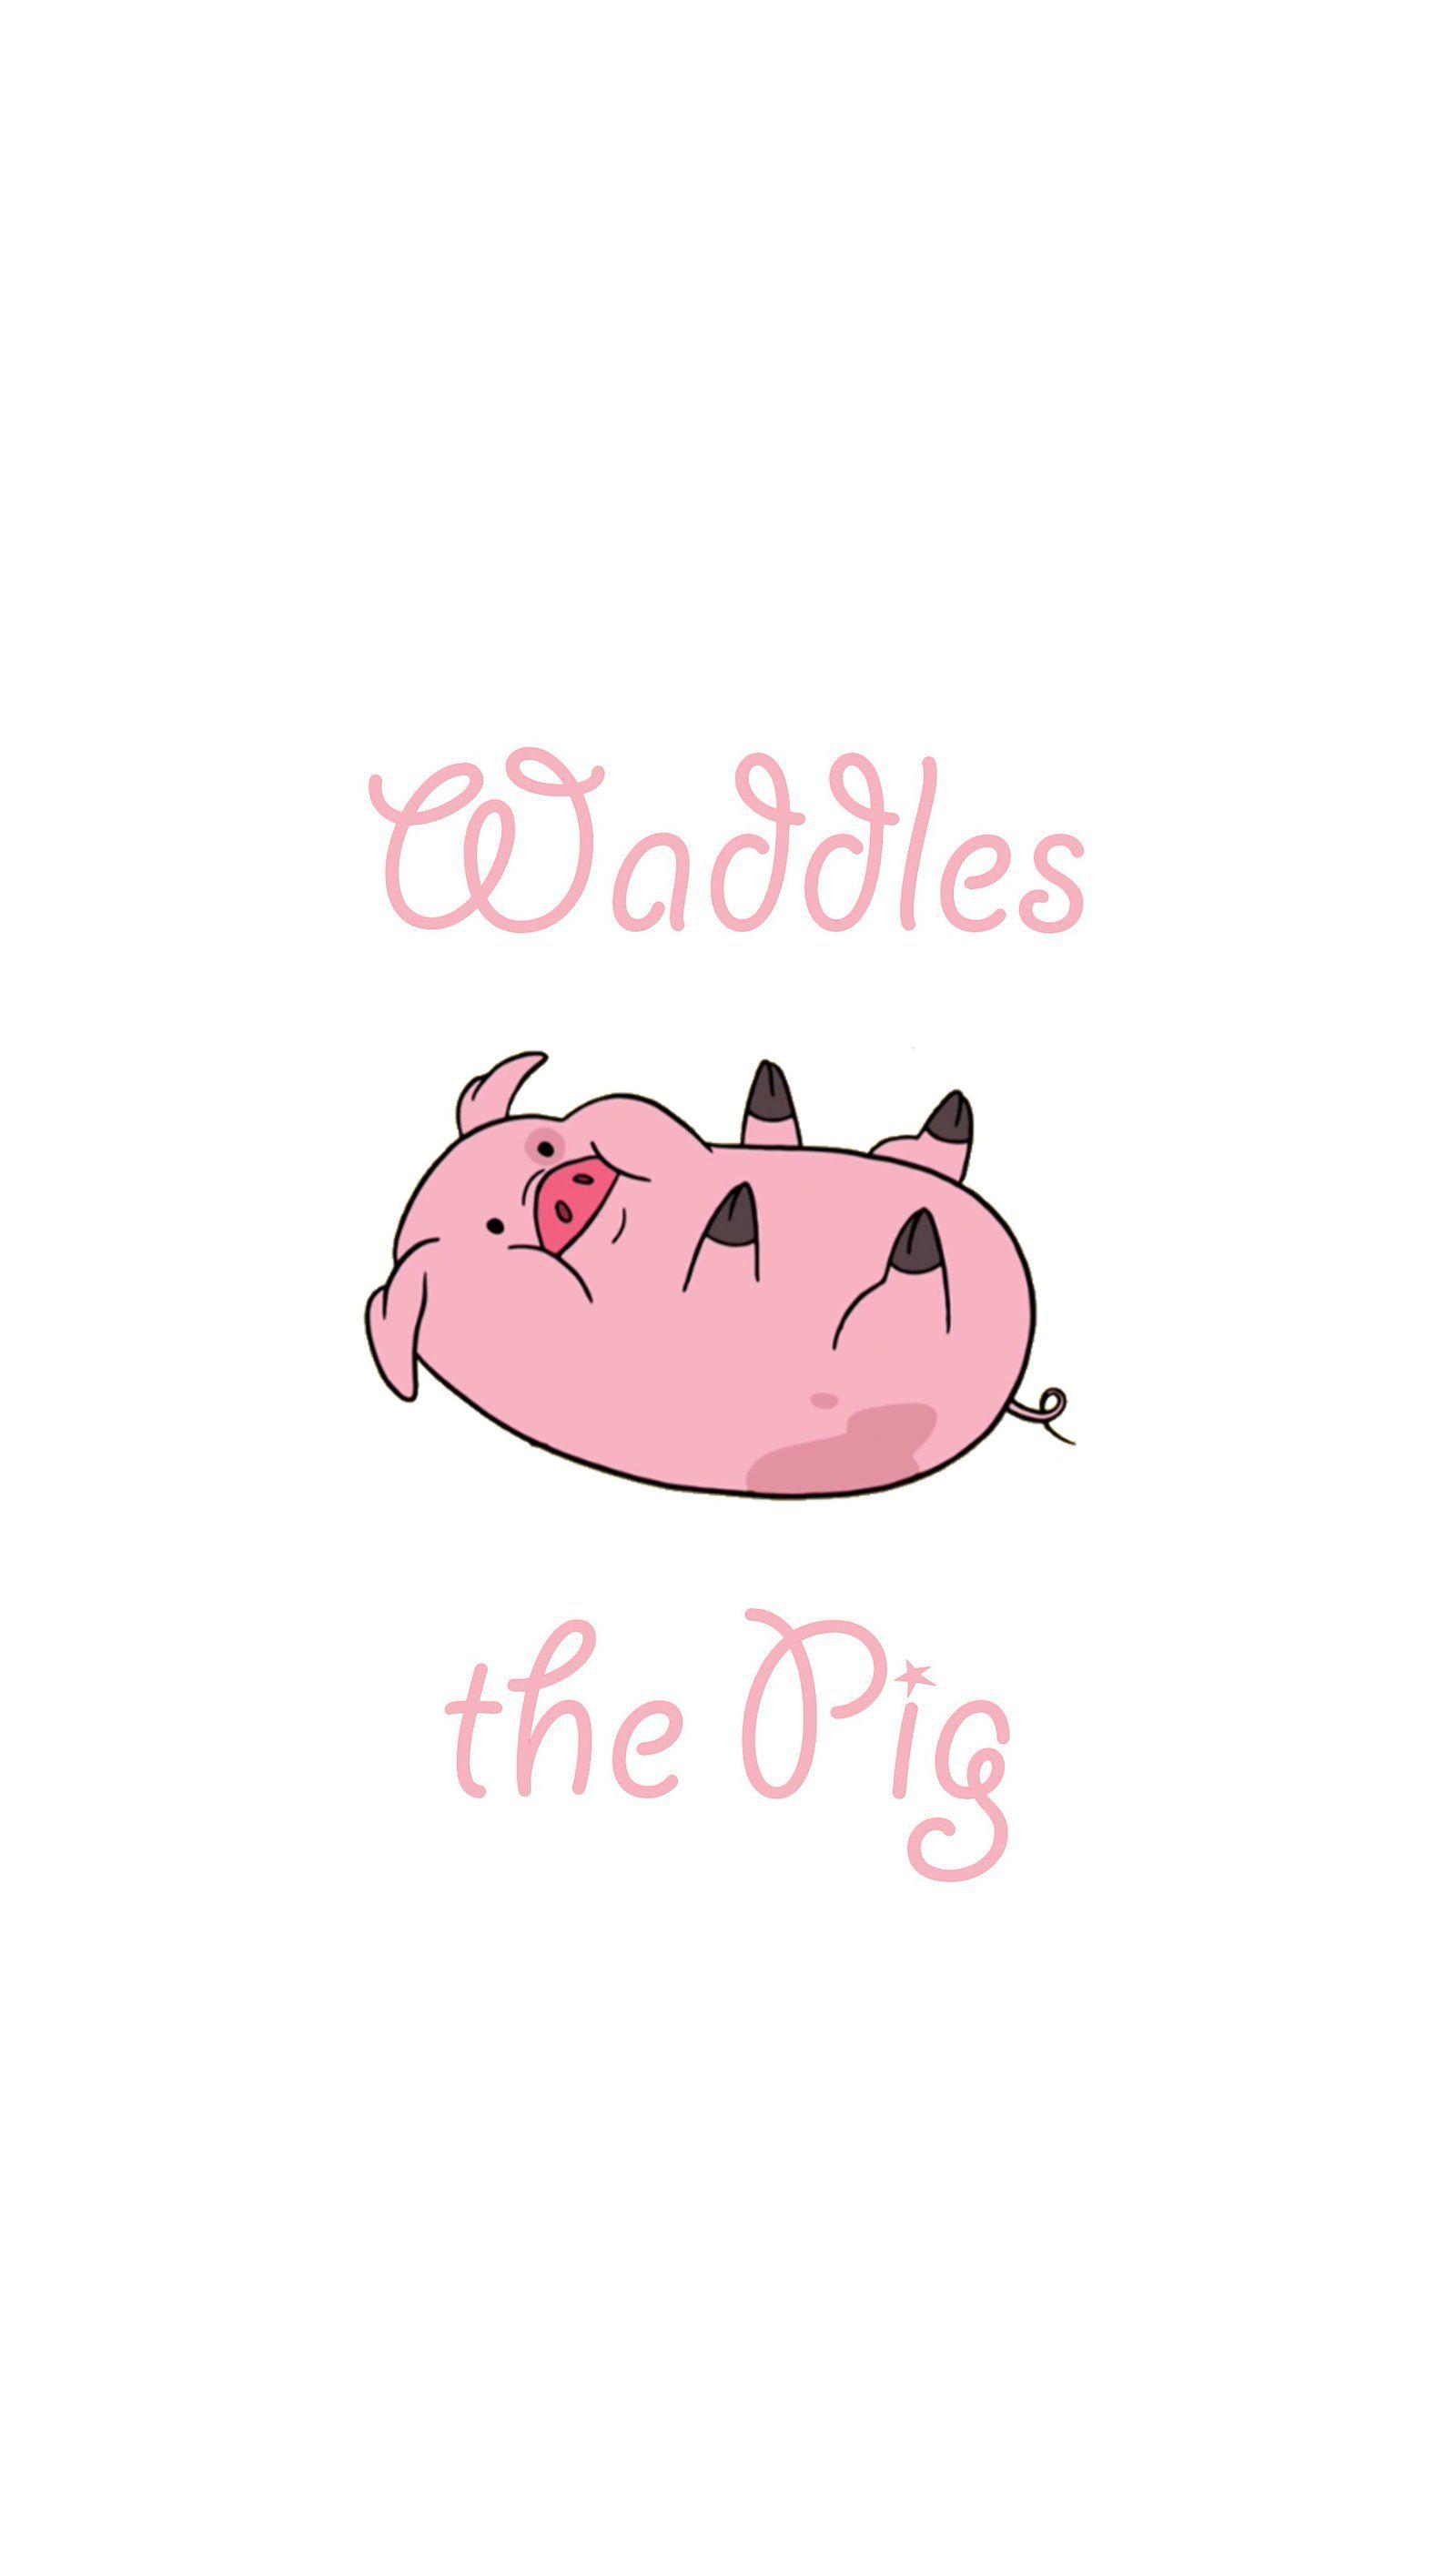 Waddles the Pig iPhone Wallpaper